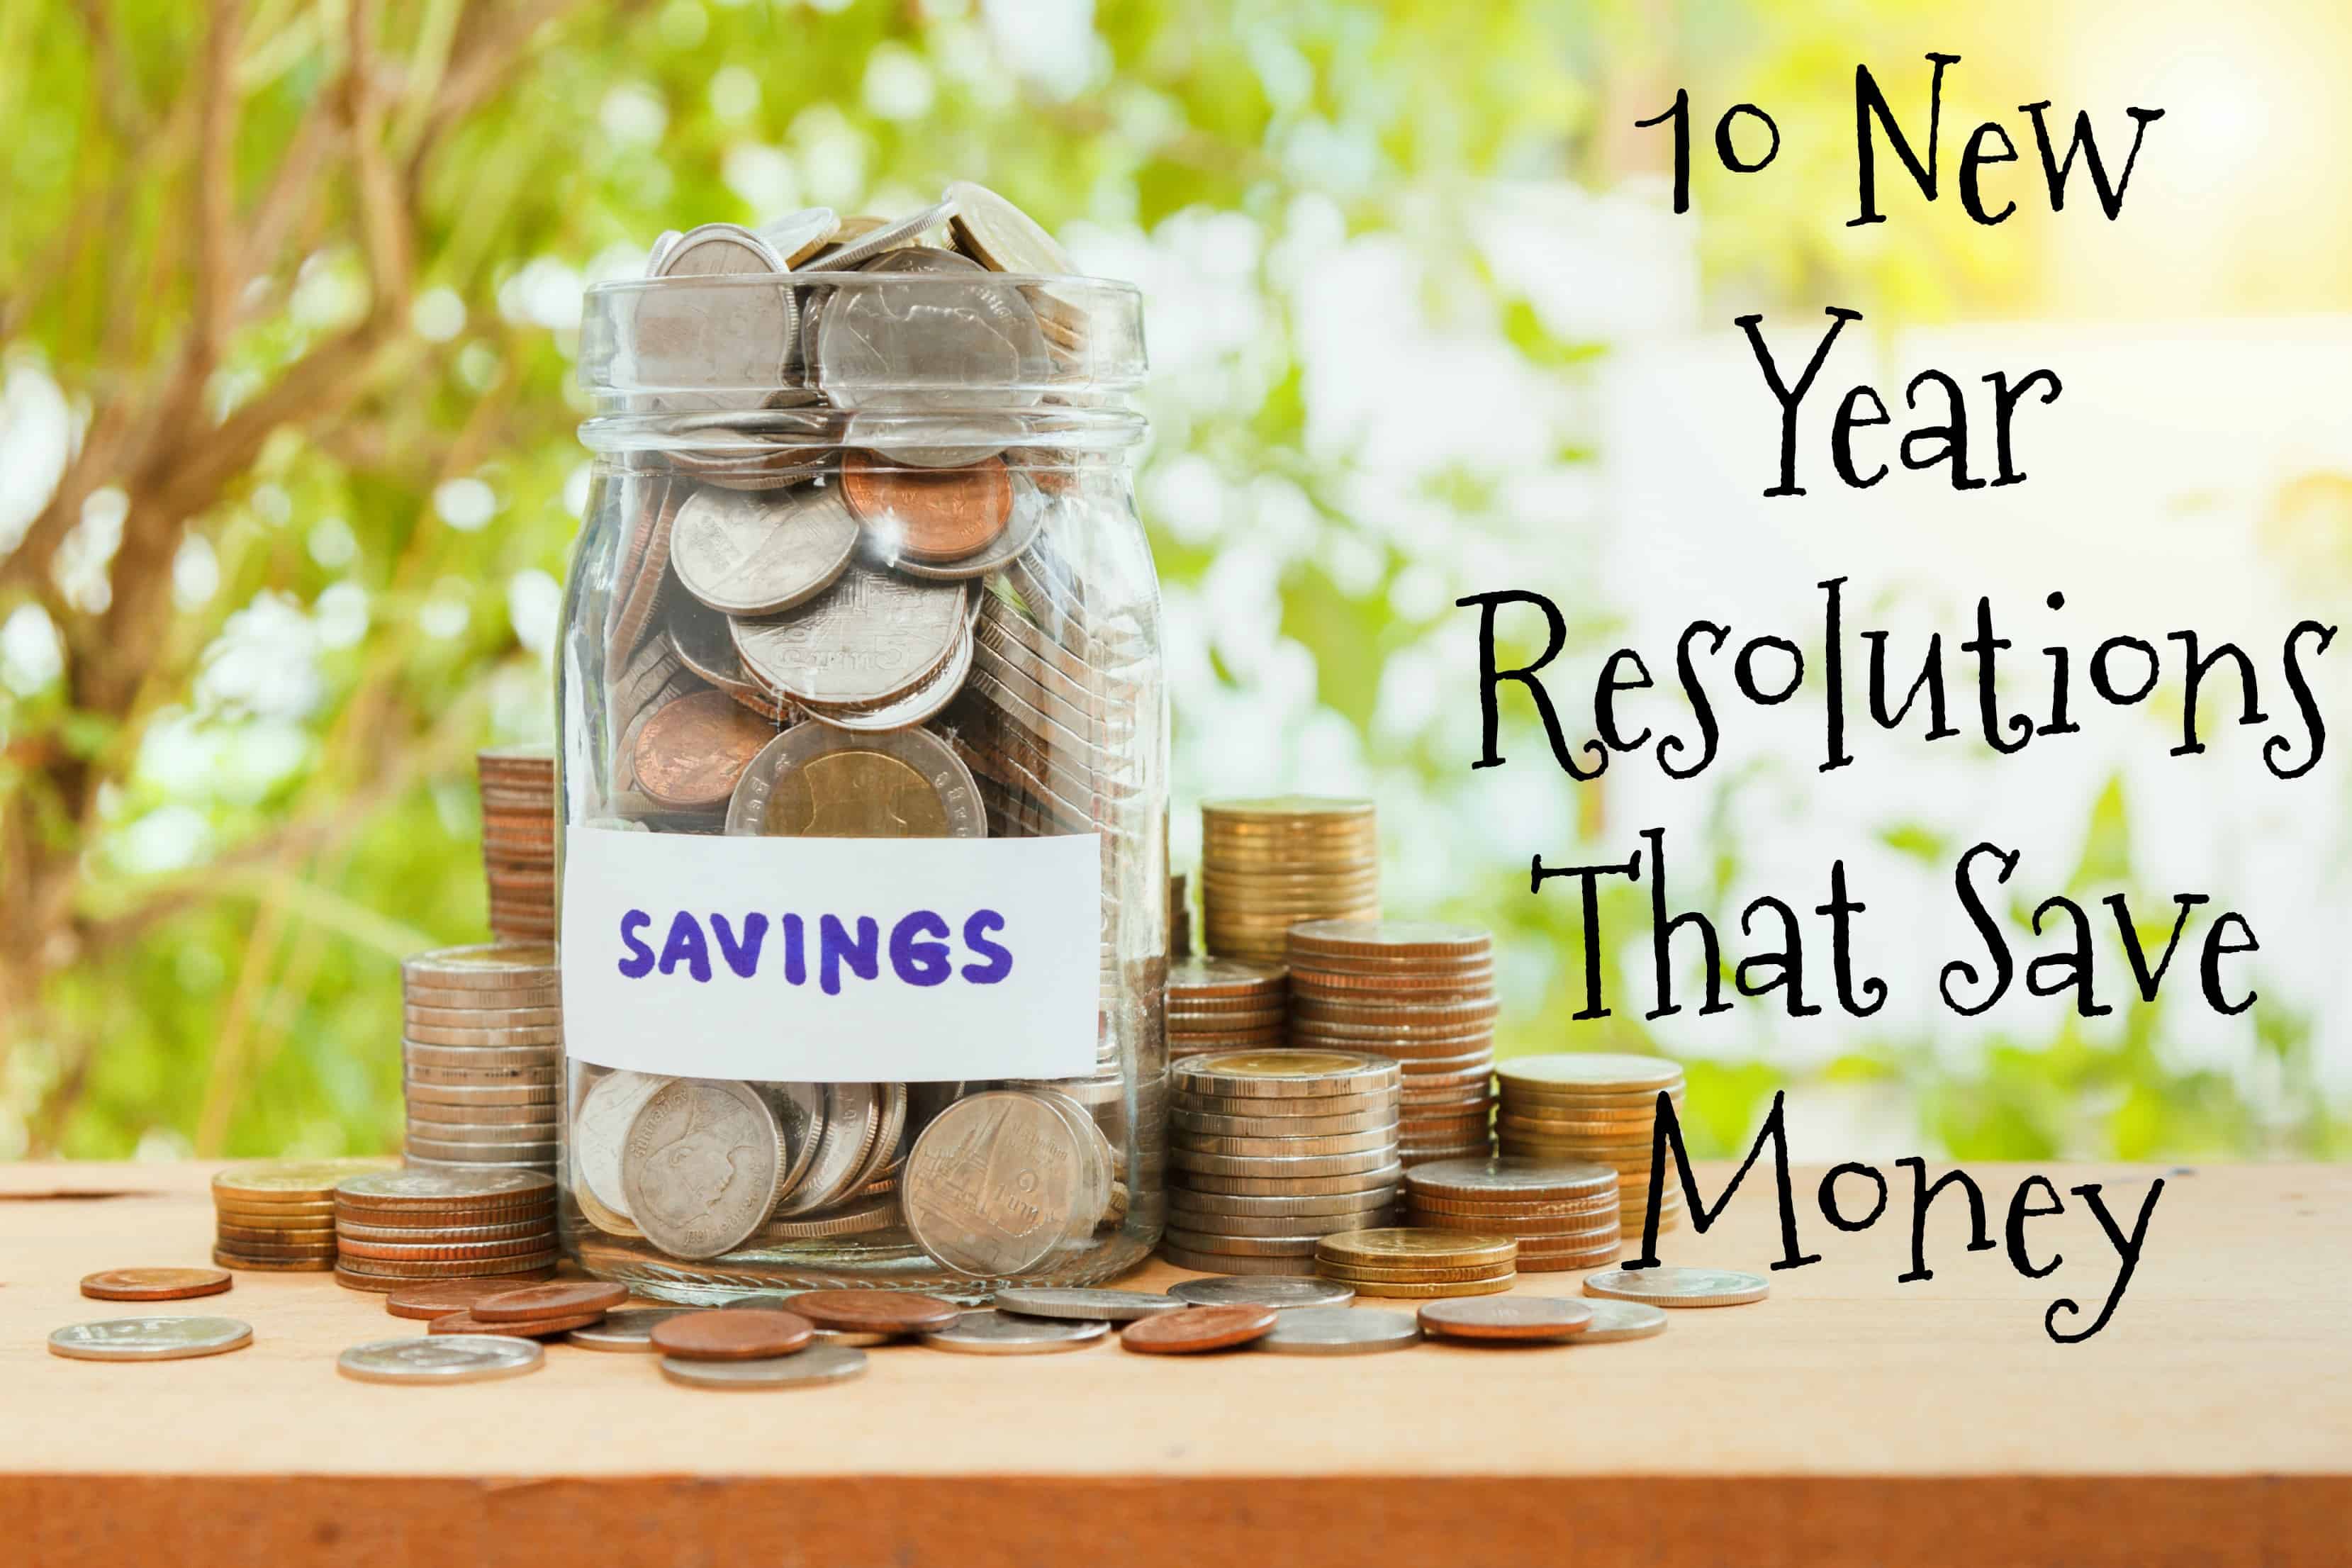 One of the biggest things people want to change in the New Year is how they spend their money. Check out these 10 New Year Resolutions that save money. - Farmer's Wife Rambles